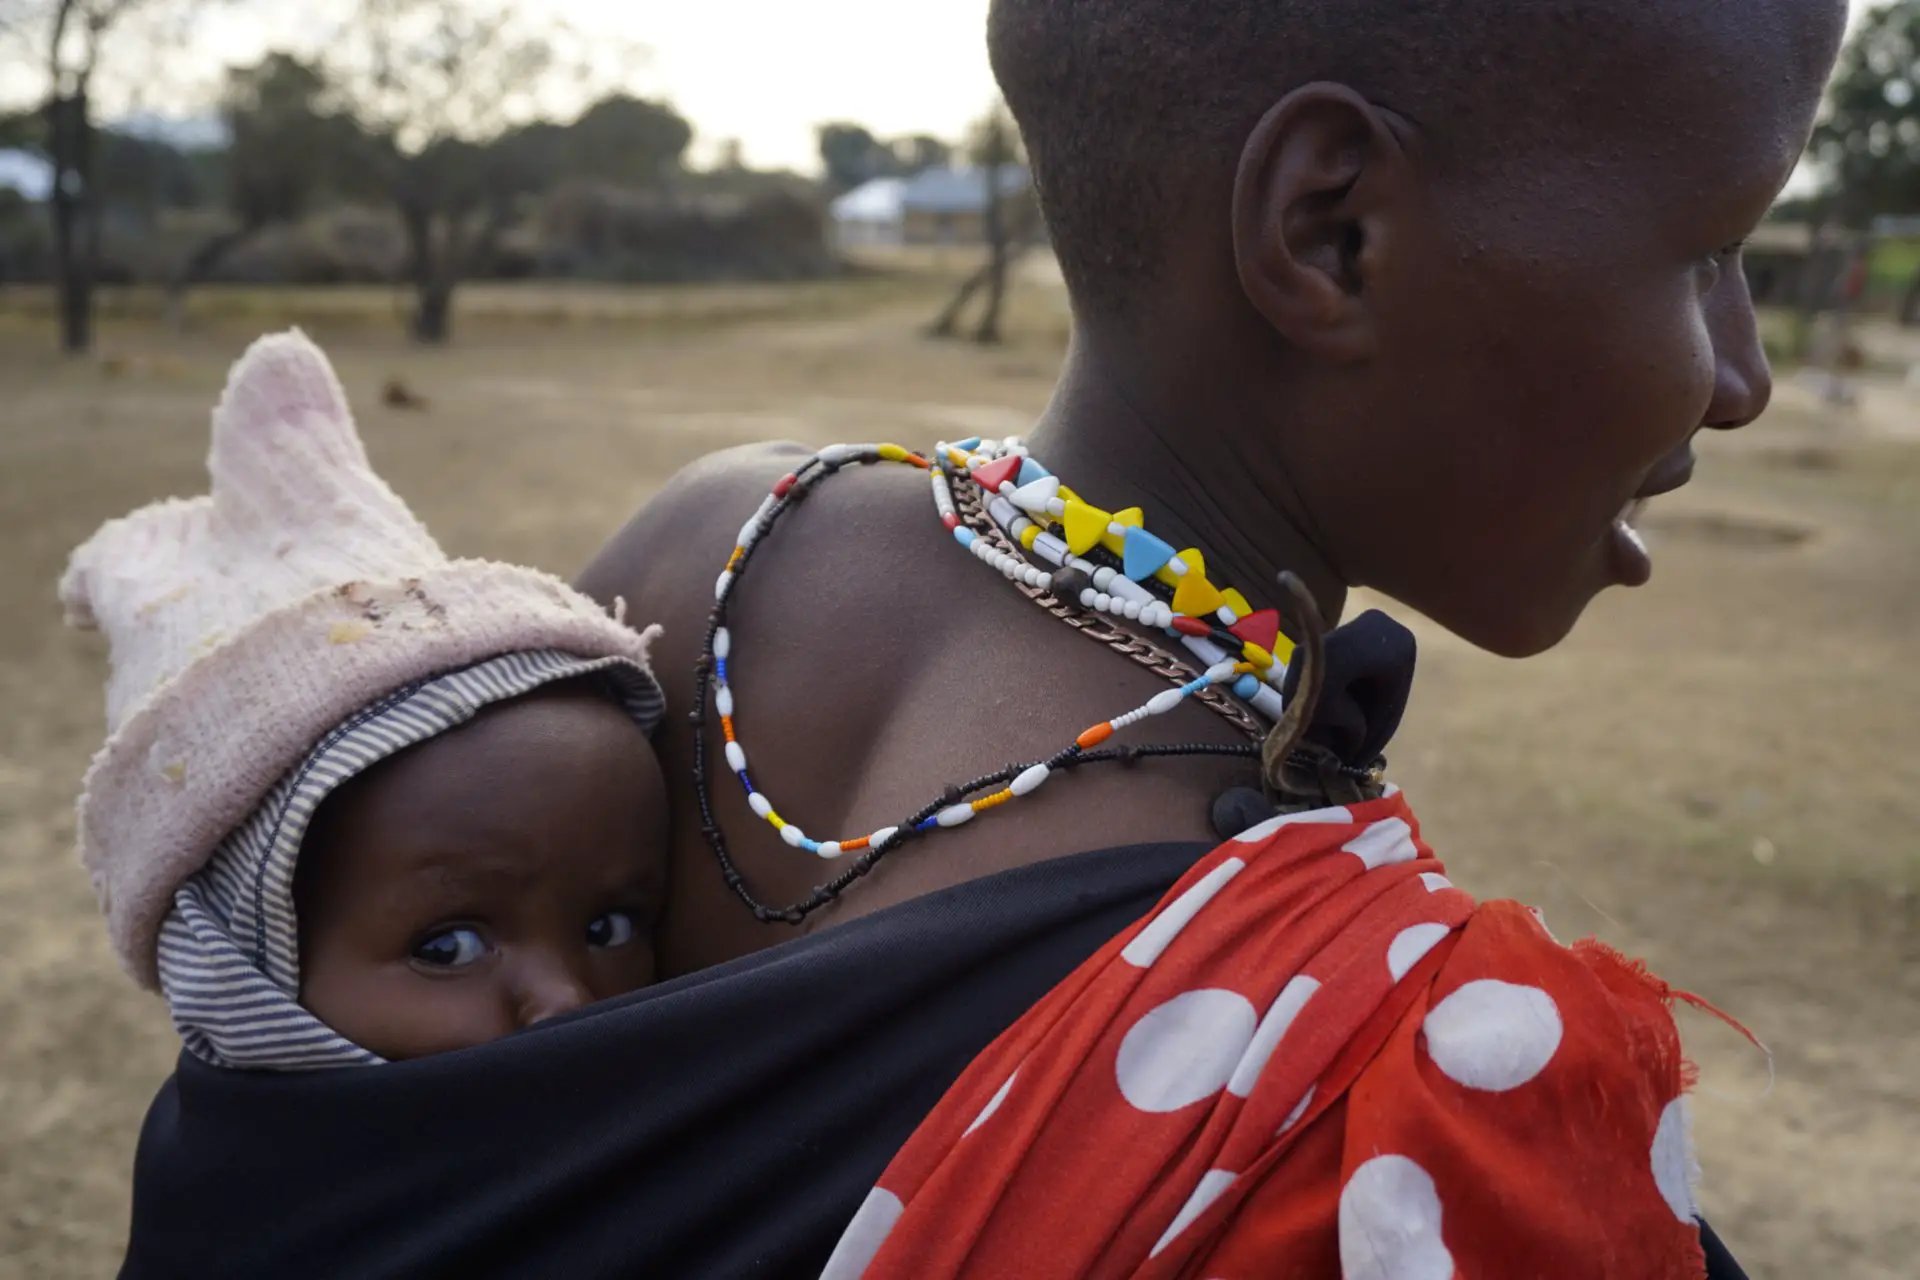 Masai woman with her baby, Tanzania - Experiencing The Globe